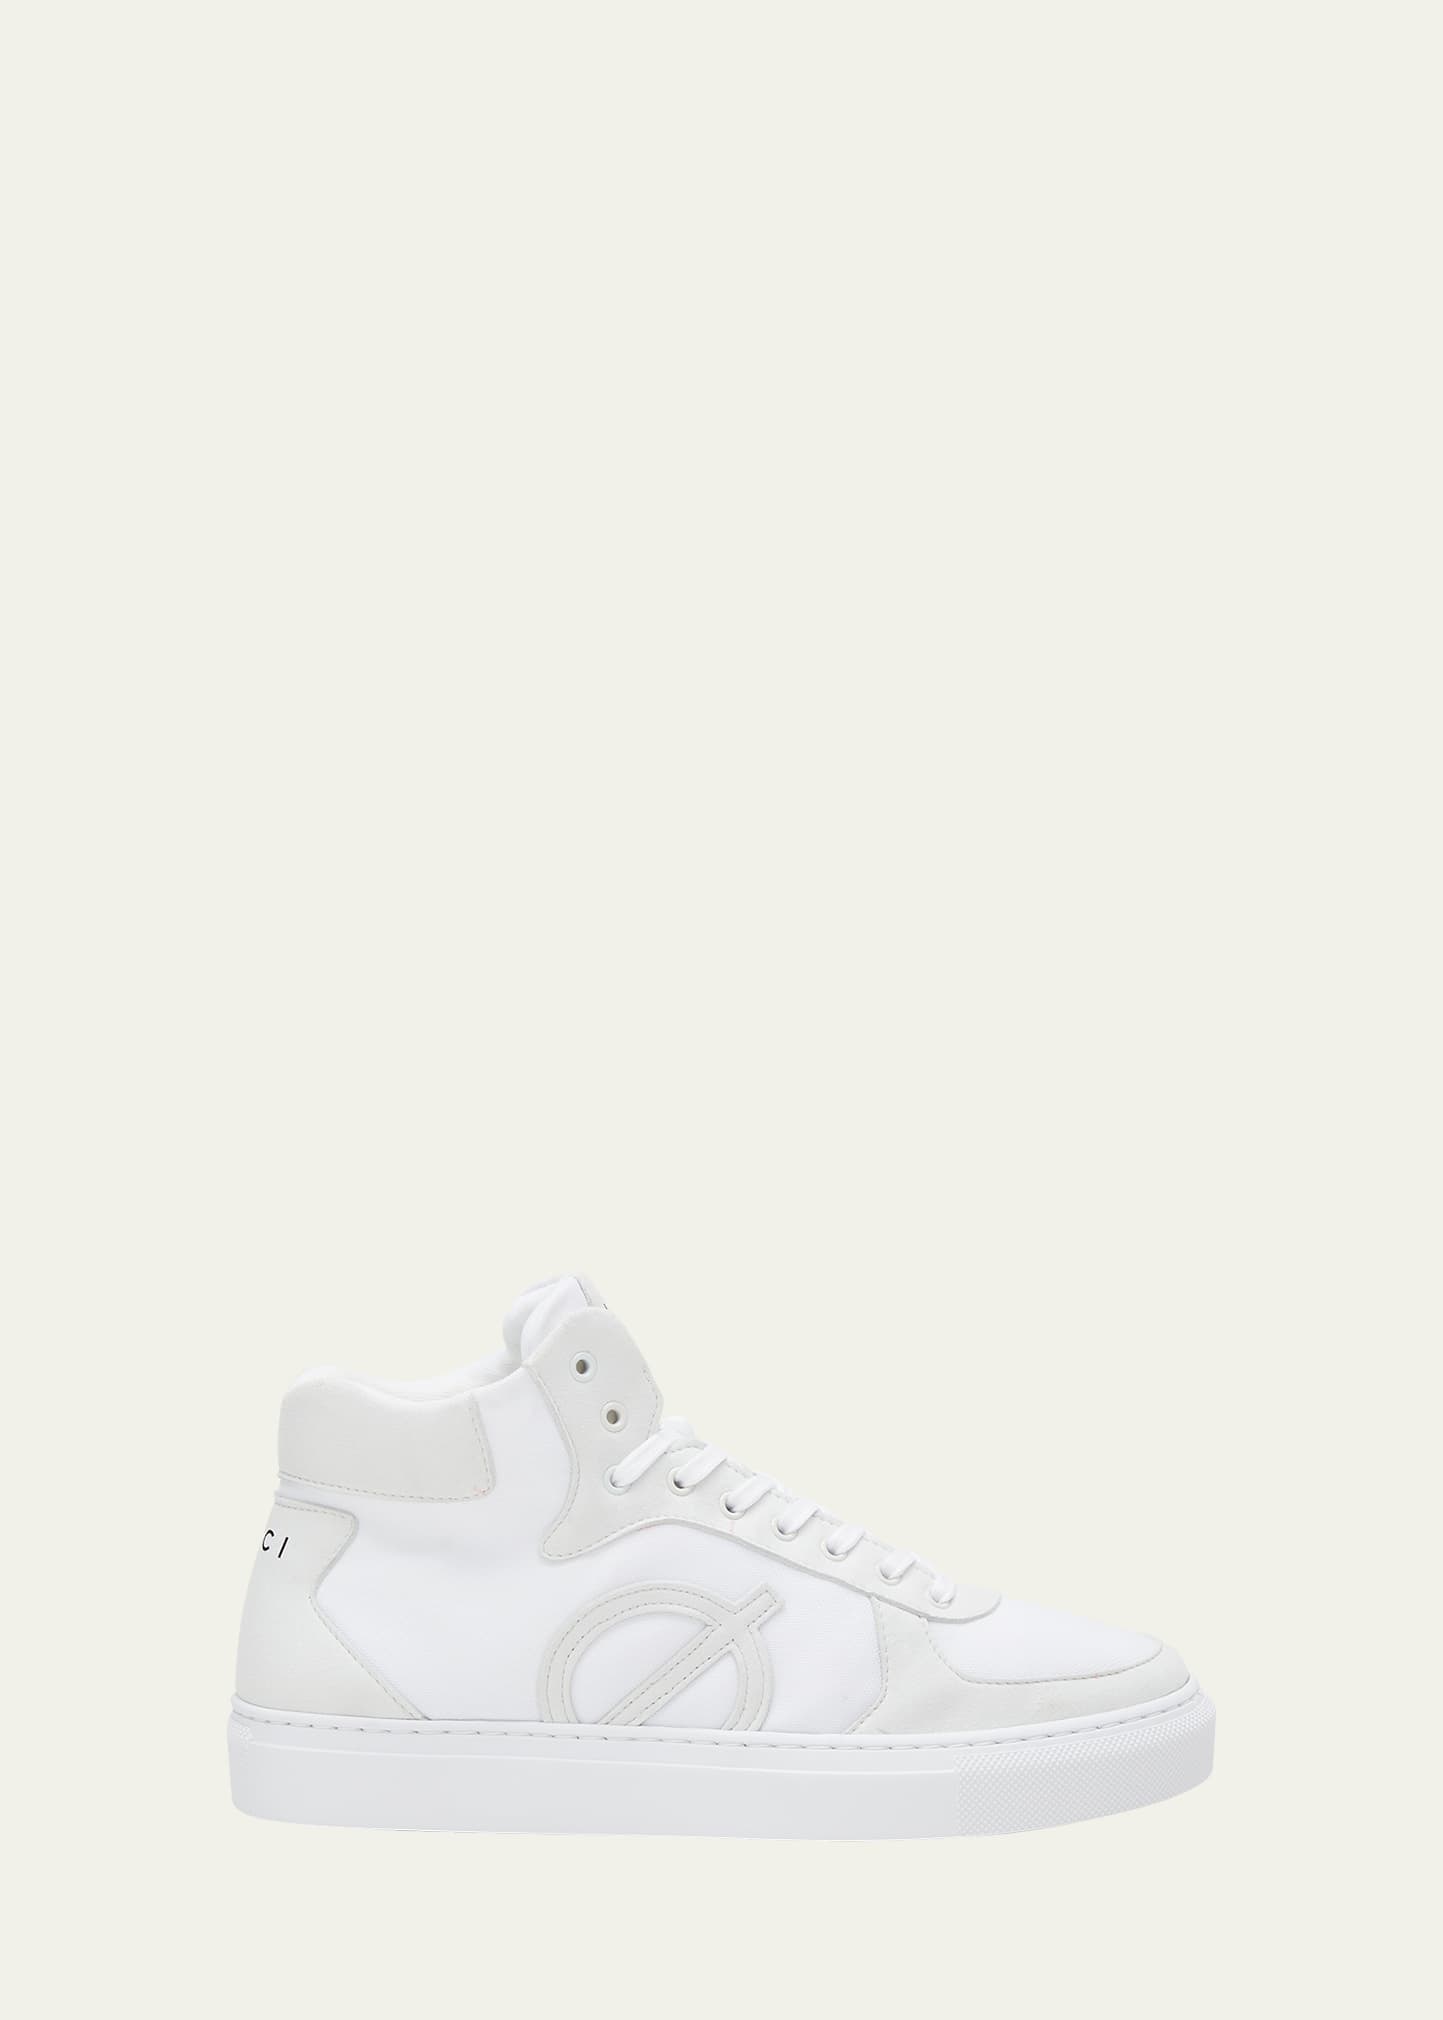 LOCI Eleven Bicolor Recycled High-Top Sneakers